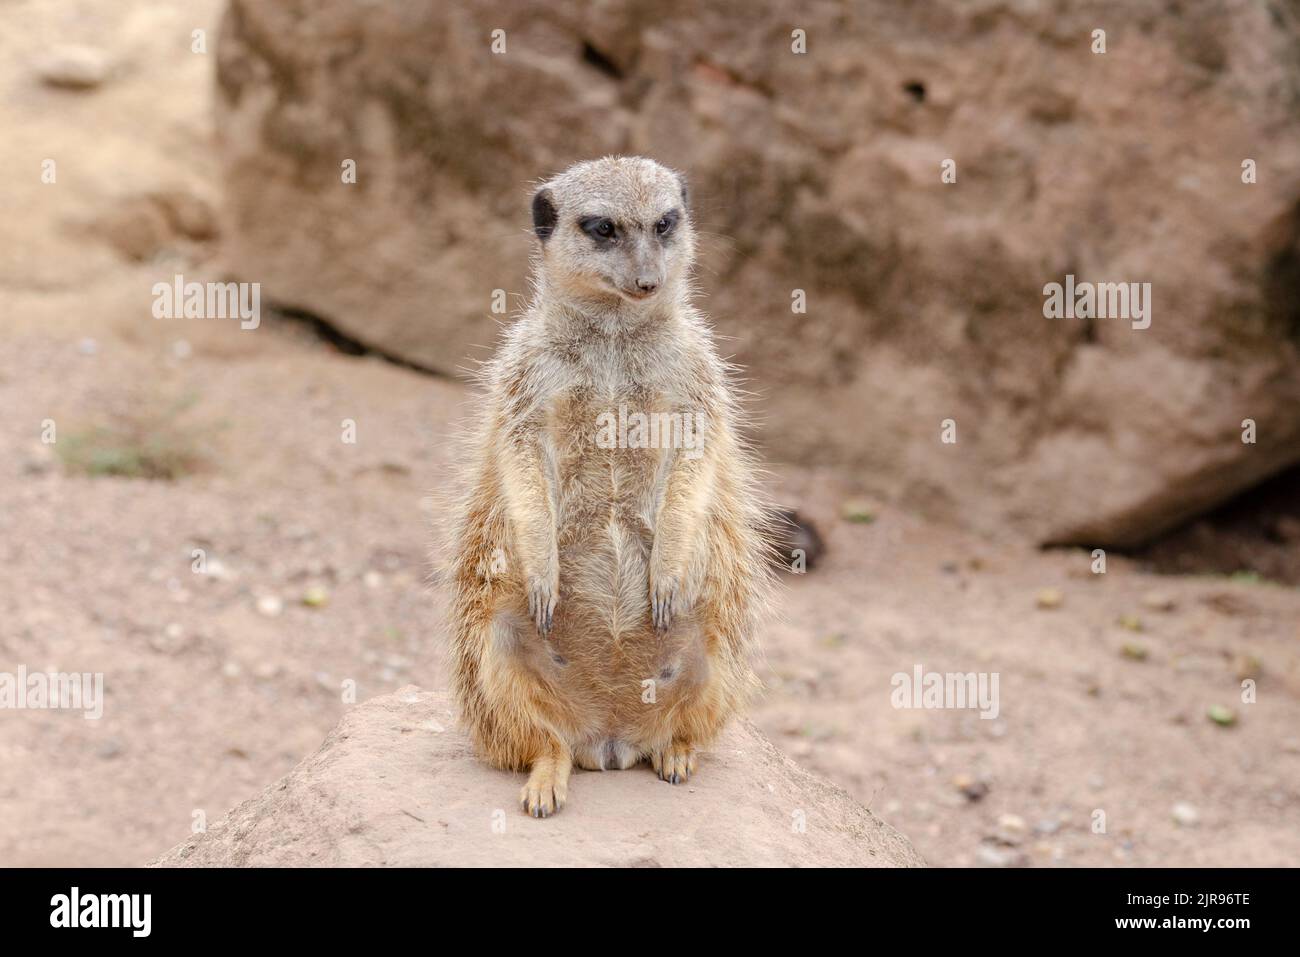 he meerkat, also called suricates or outdated Scharrtier, is a species of mammal from the mongoose family Stock Photo